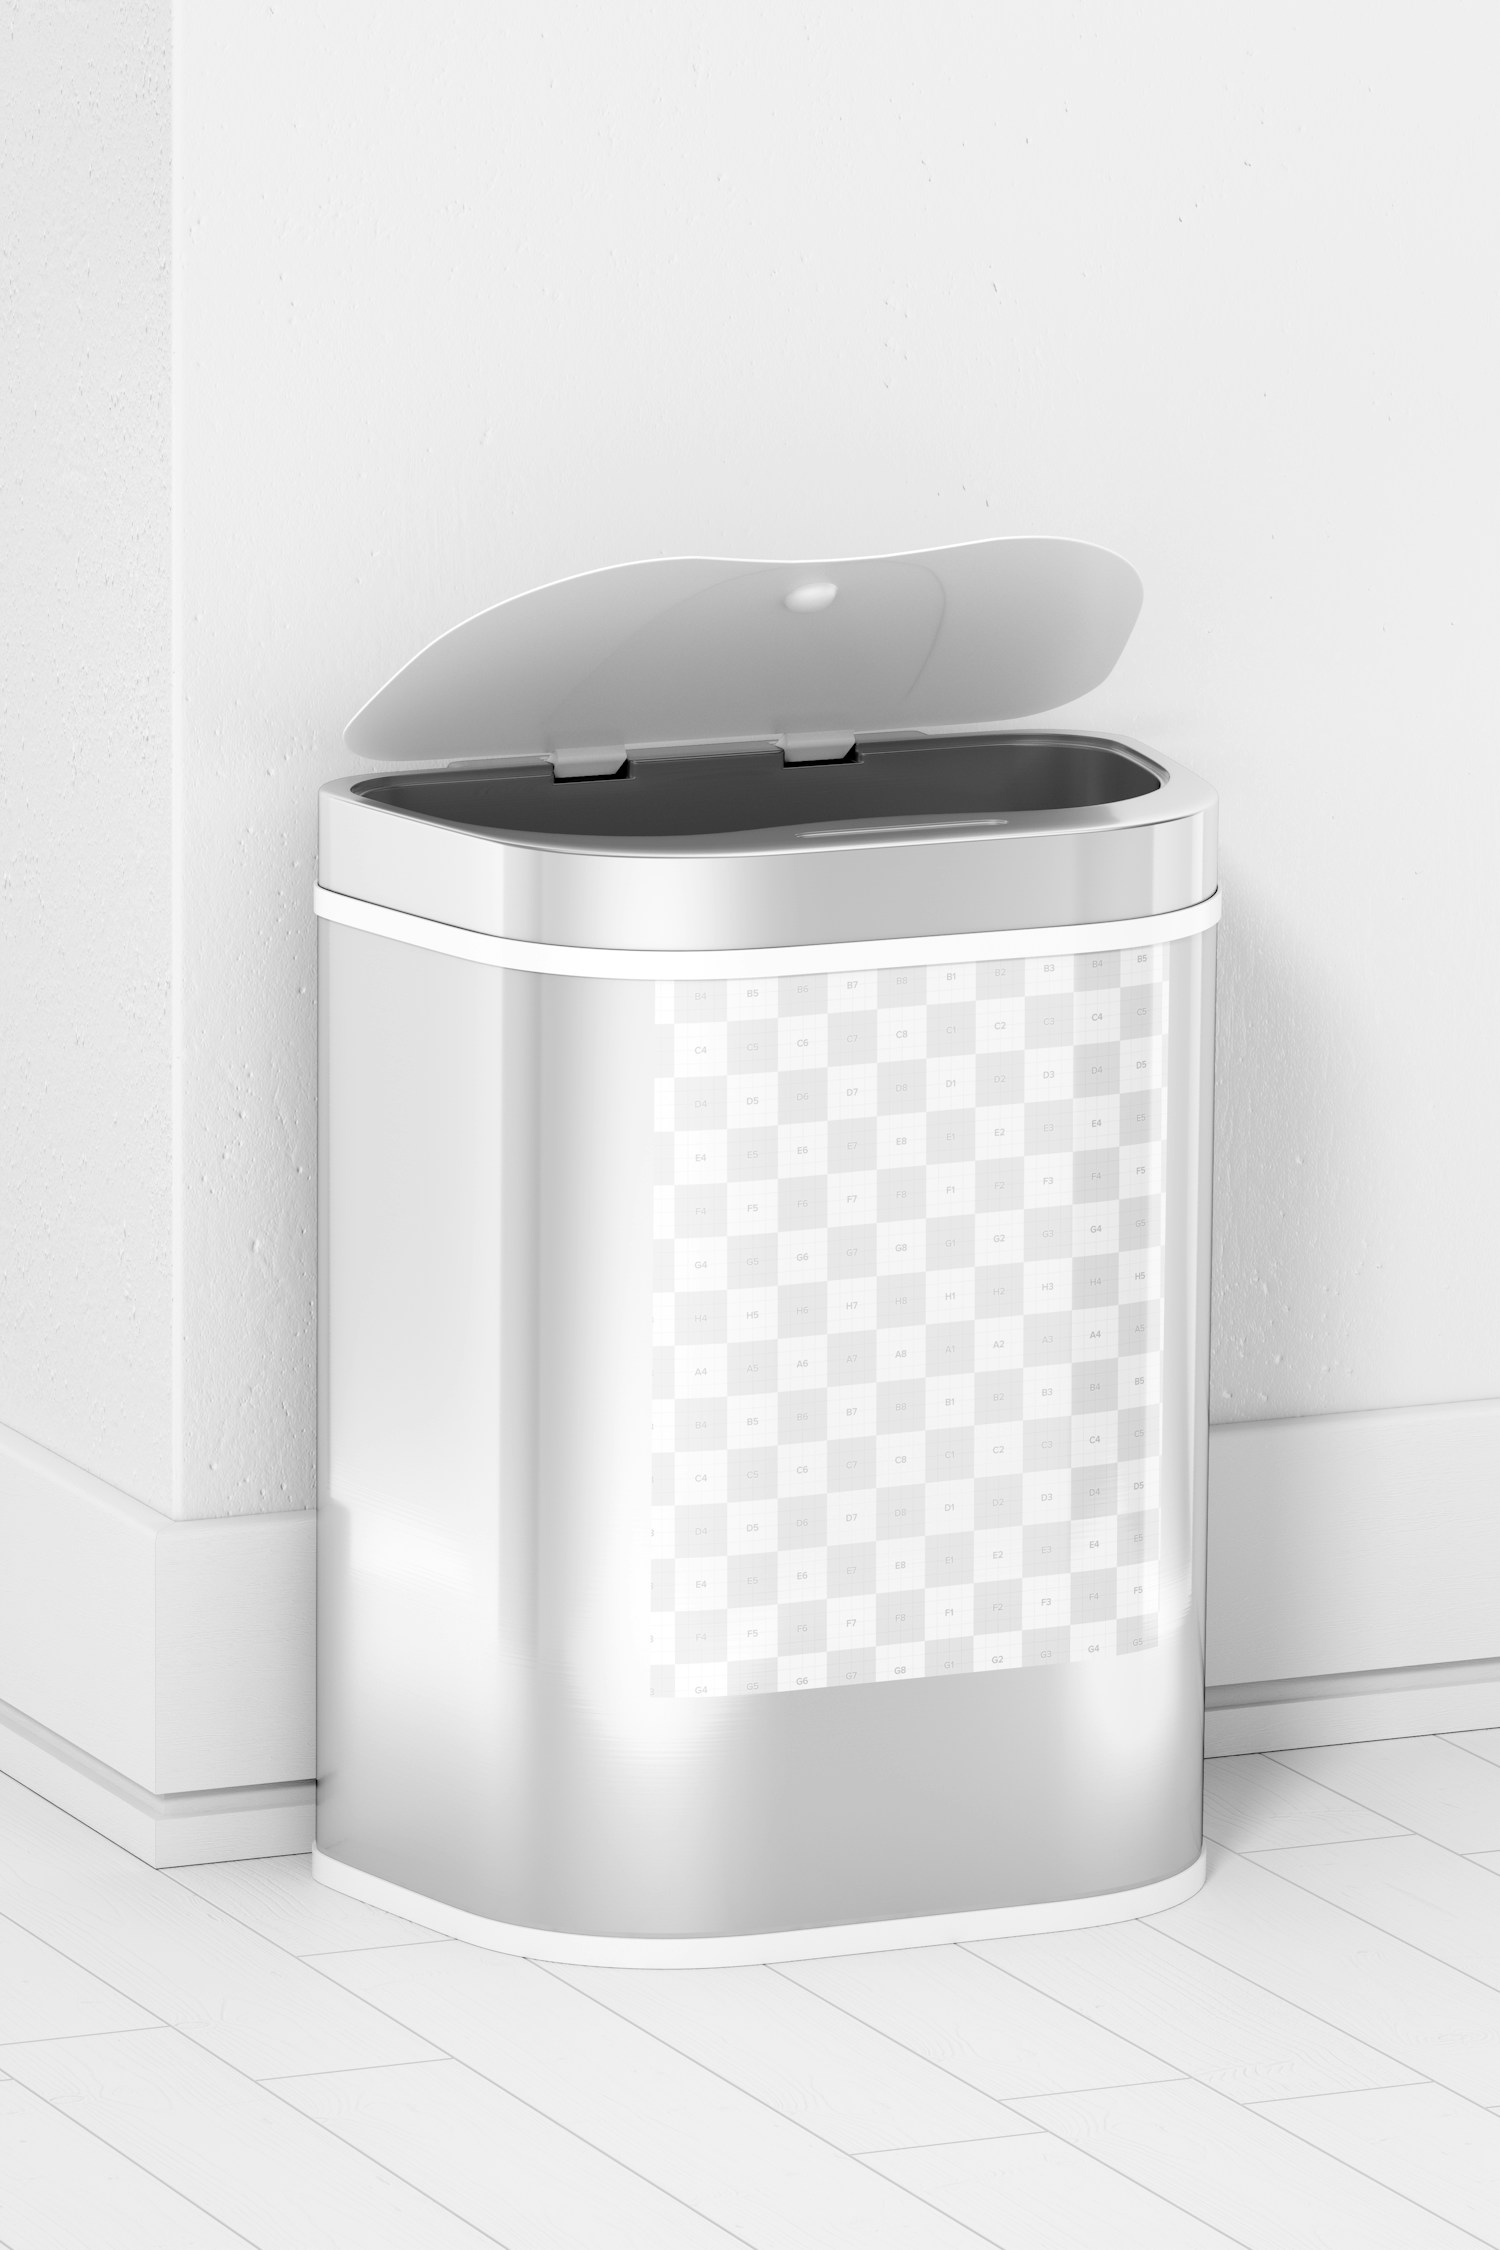 Garbage Can with Lid Mockup, Opened